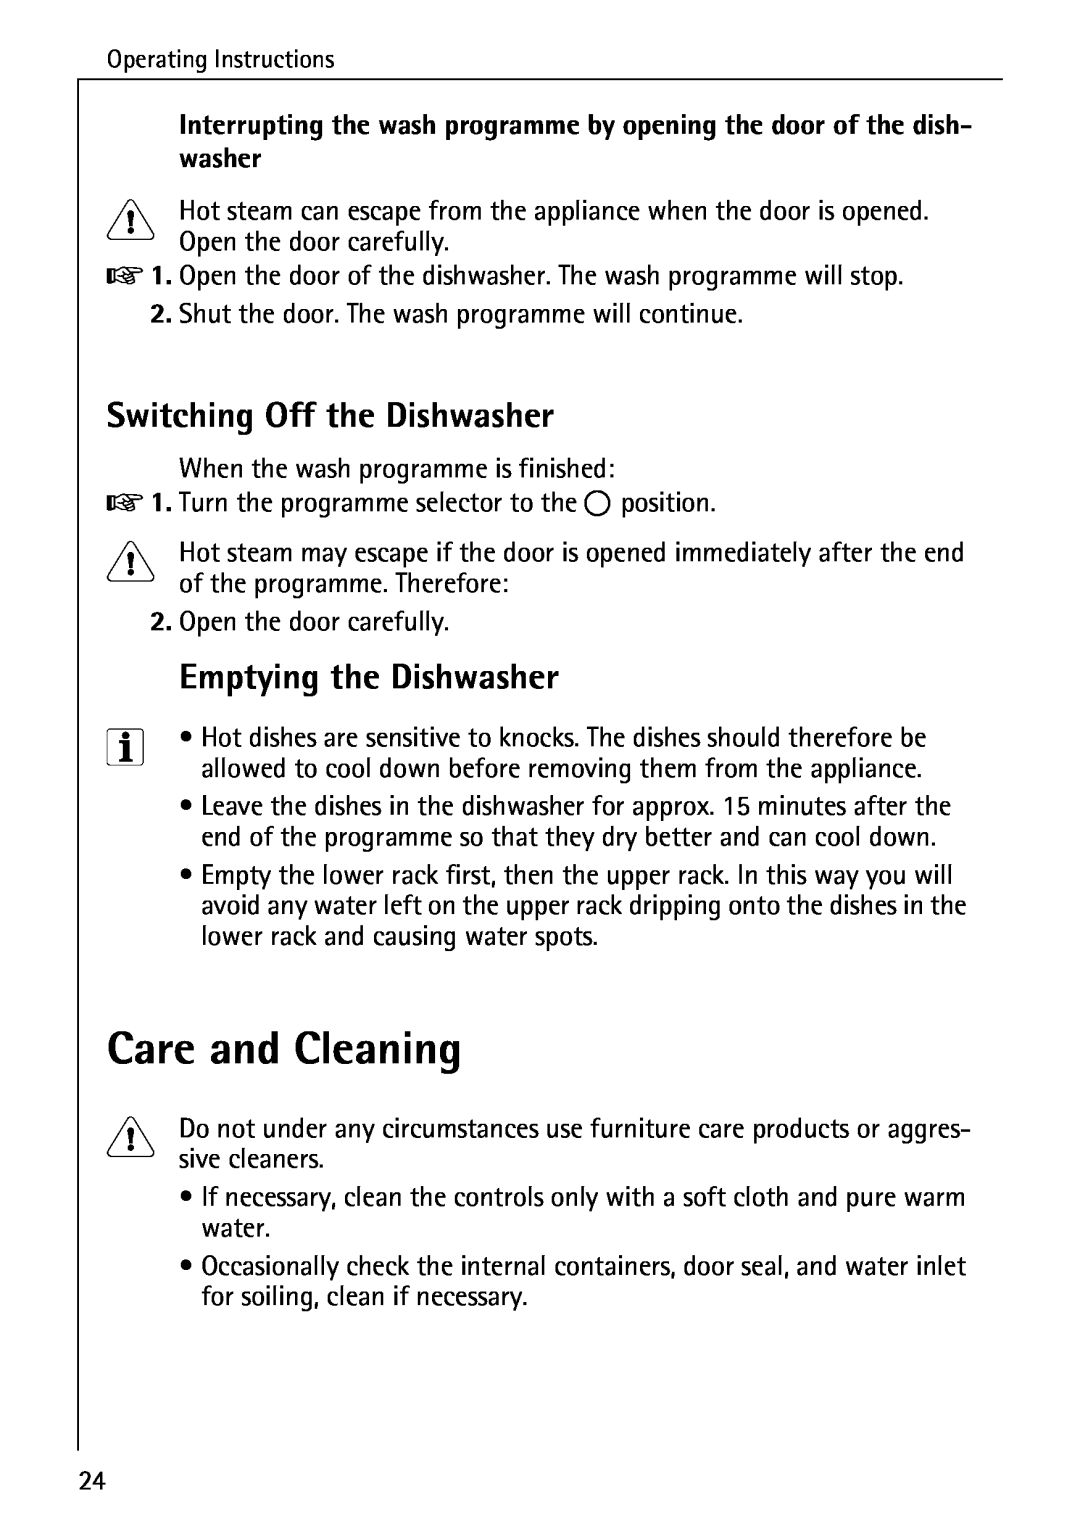 AEG 33060 I manual Care and Cleaning, Switching Off the Dishwasher, Emptying the Dishwasher, Open the door carefully 